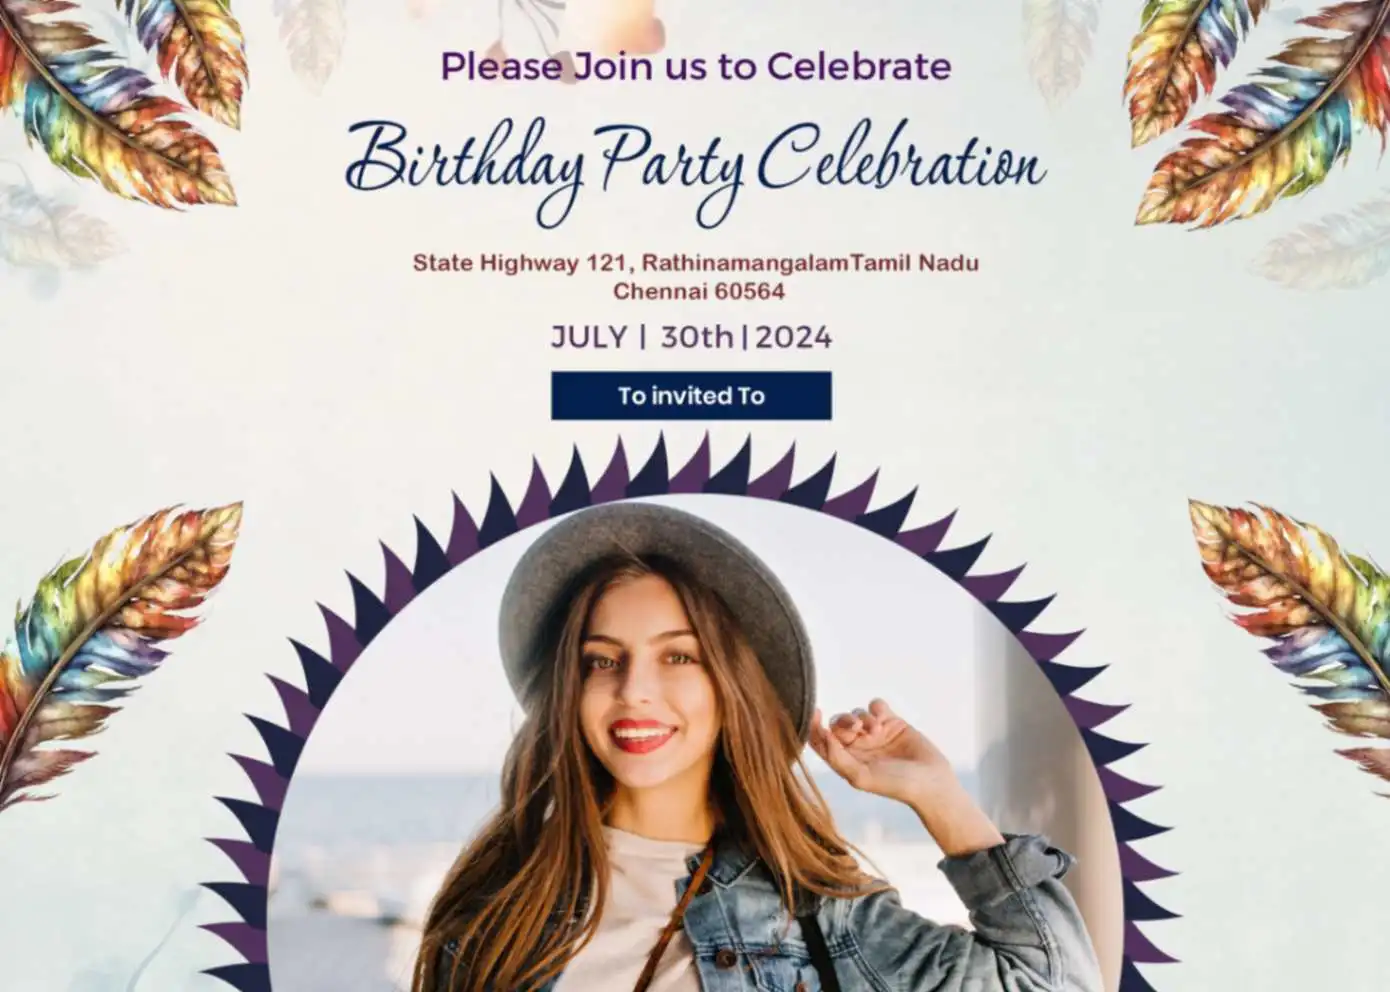 Online Card for Birthday Invitation: The Digital Way to Celebrate